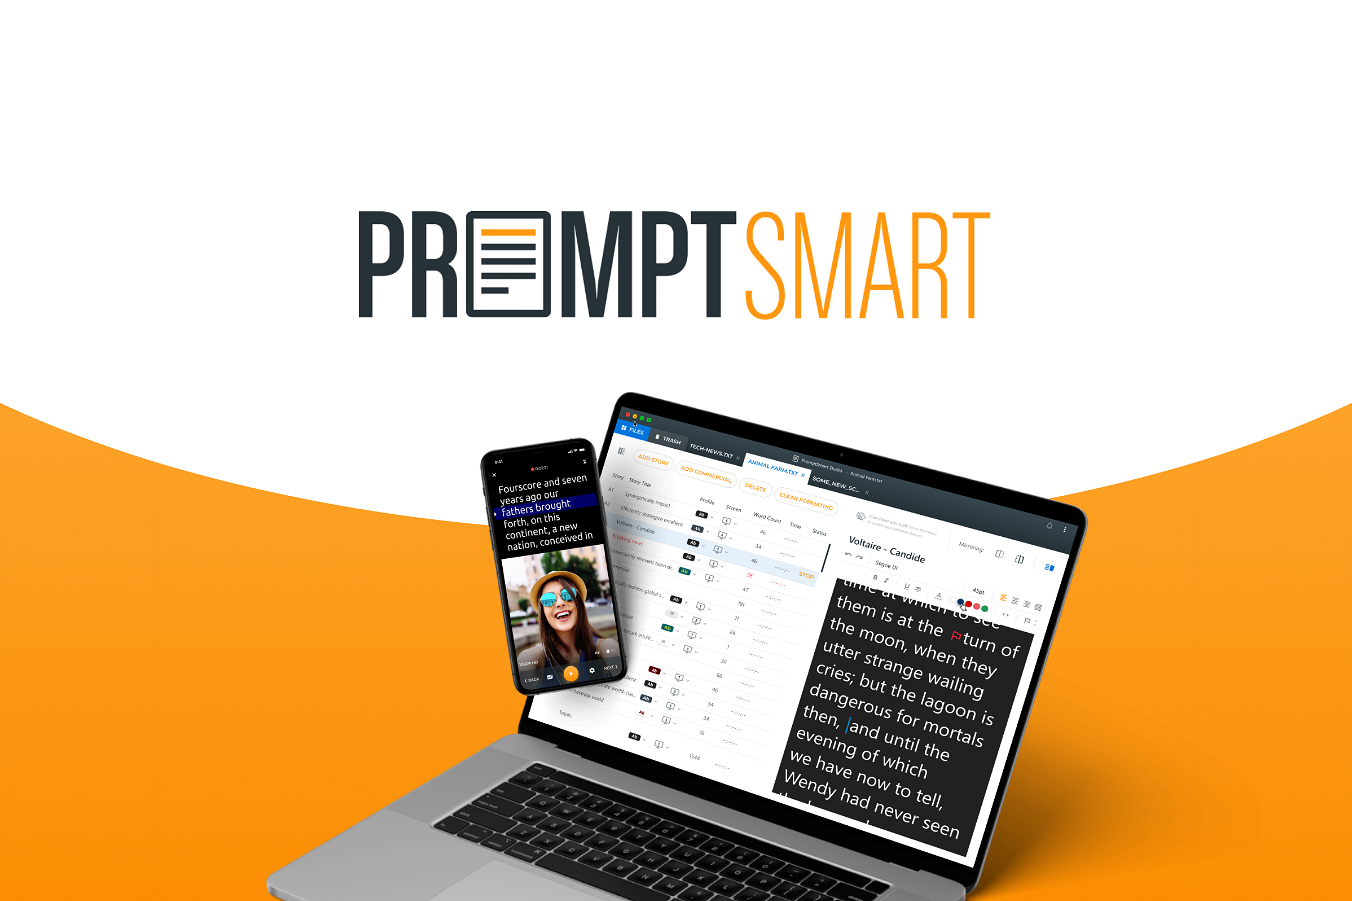 PromptSmart is a personal teleprompter tool that only scrolls when you speak, so every presentation is clear.